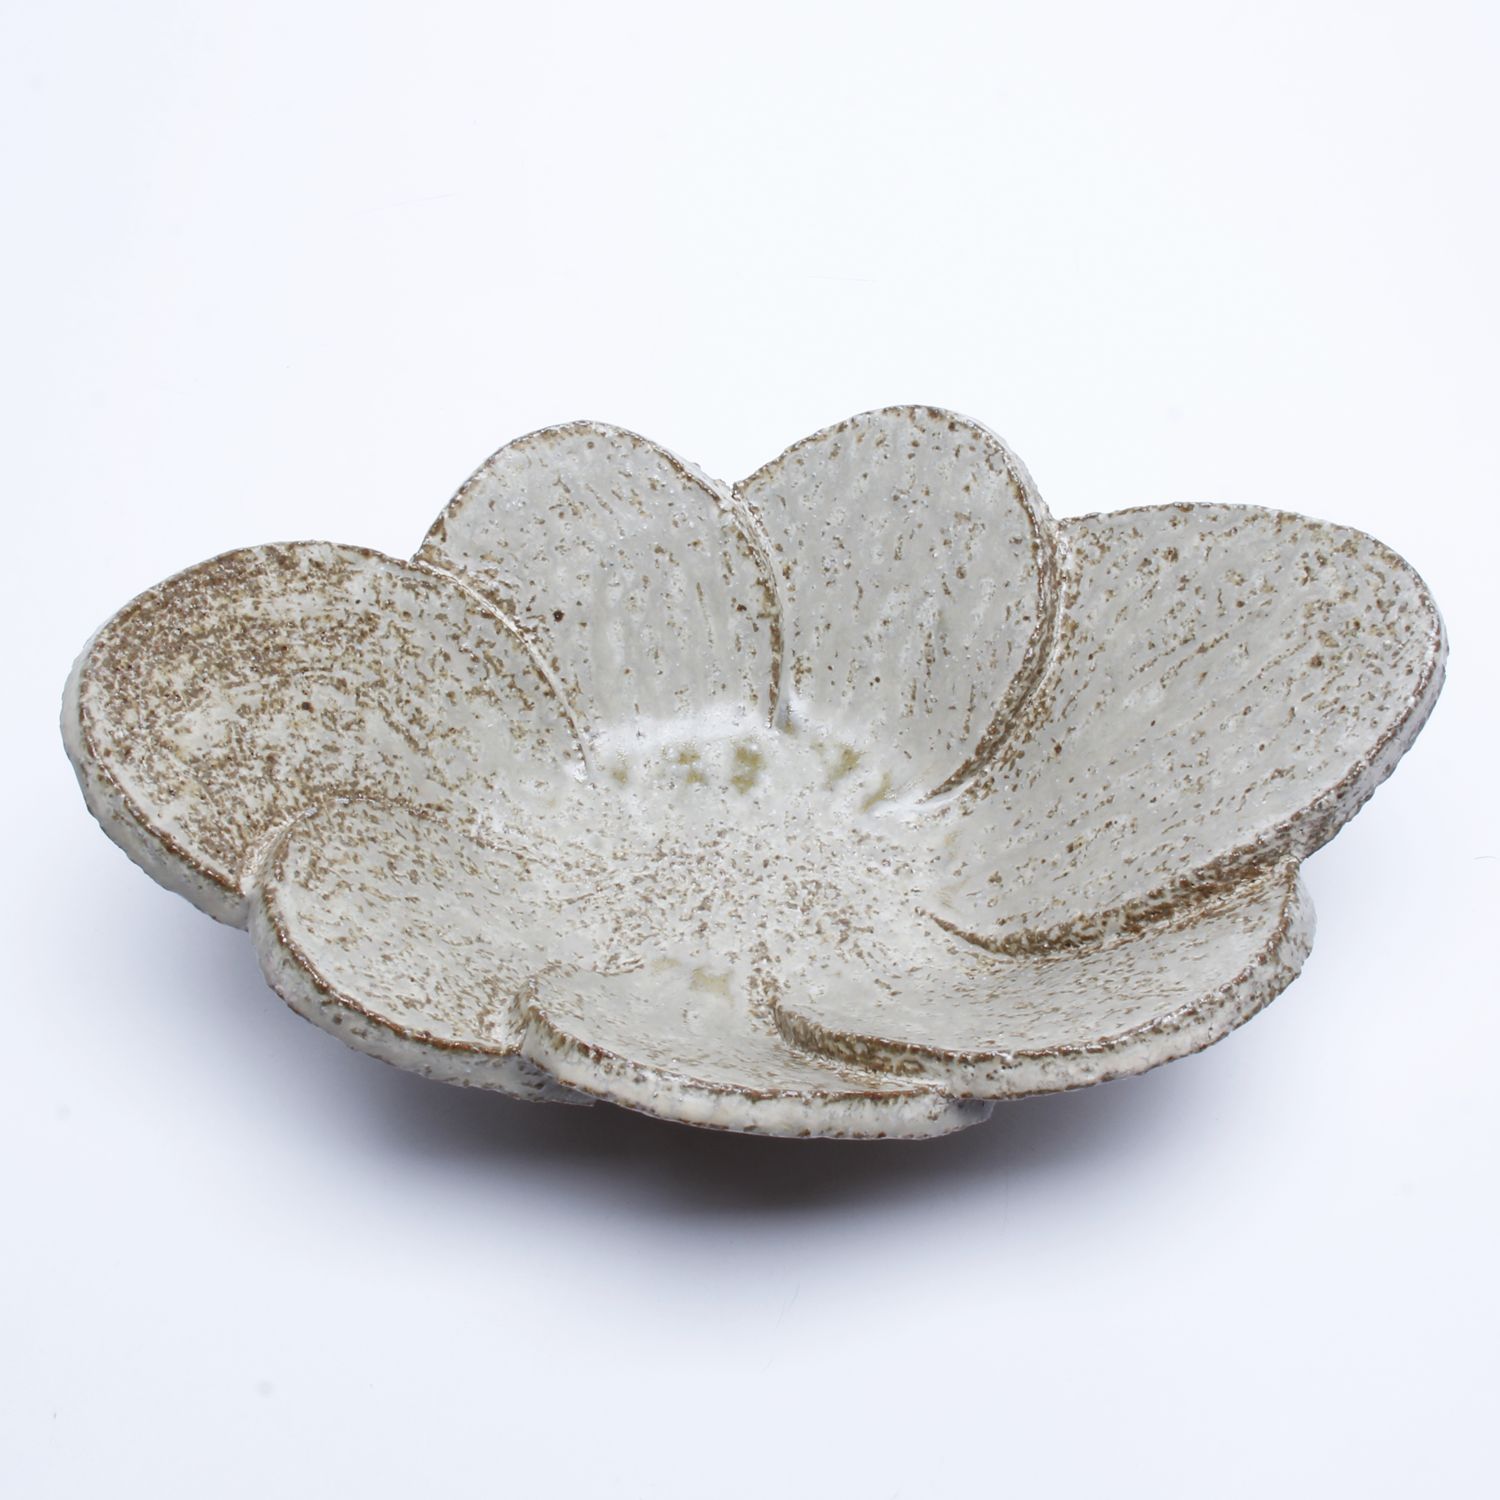 Bruce Cochrane: Overlapping Tan Oval Bowl Product Image 3 of 5